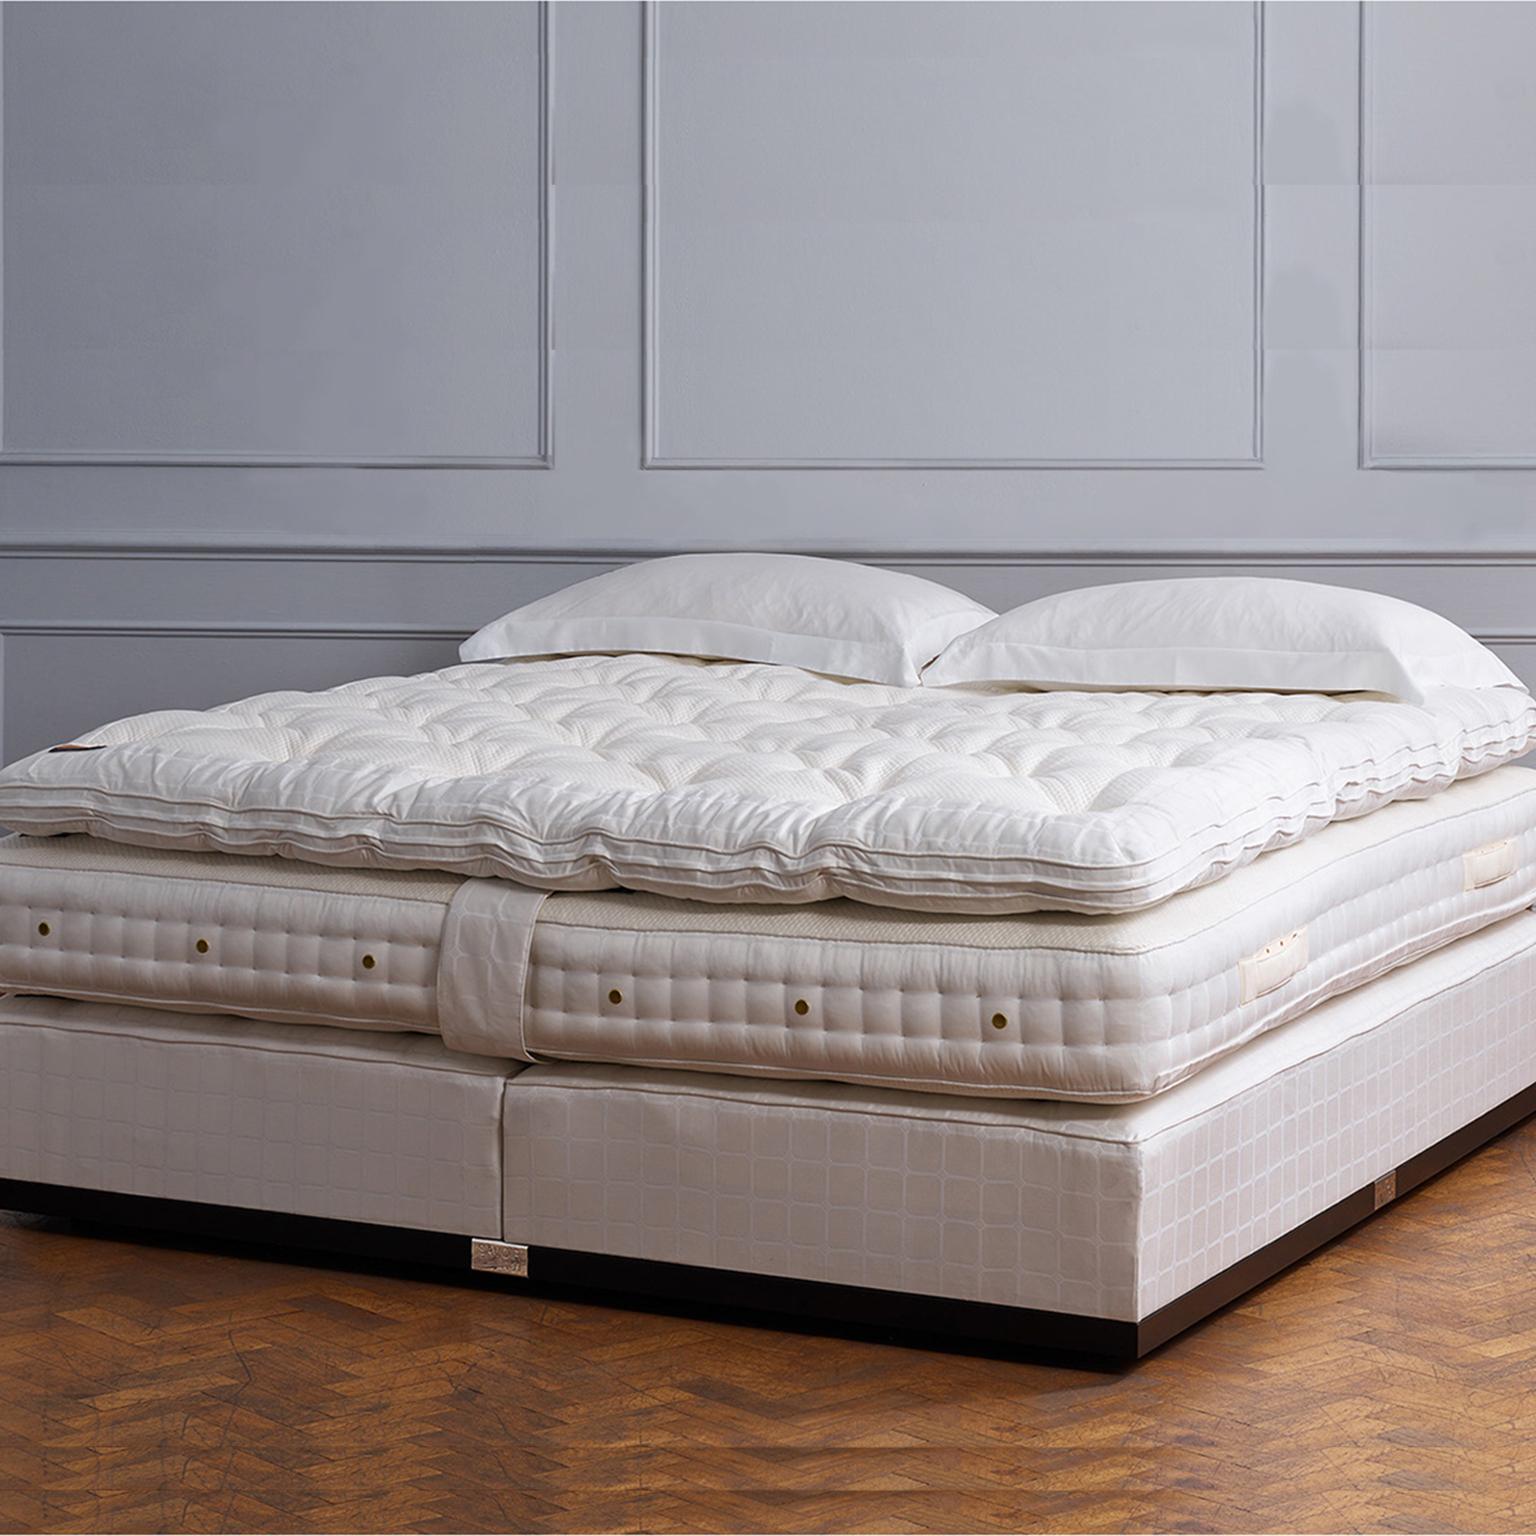 The pinnacle of over a century of bed-making expertise, requiring at least 120 hours of handcrafting, the Nº1 is the ultimate in luxury. Its foundation is a box spring base, crafted from the finest materials for optimum support - curled horse tail